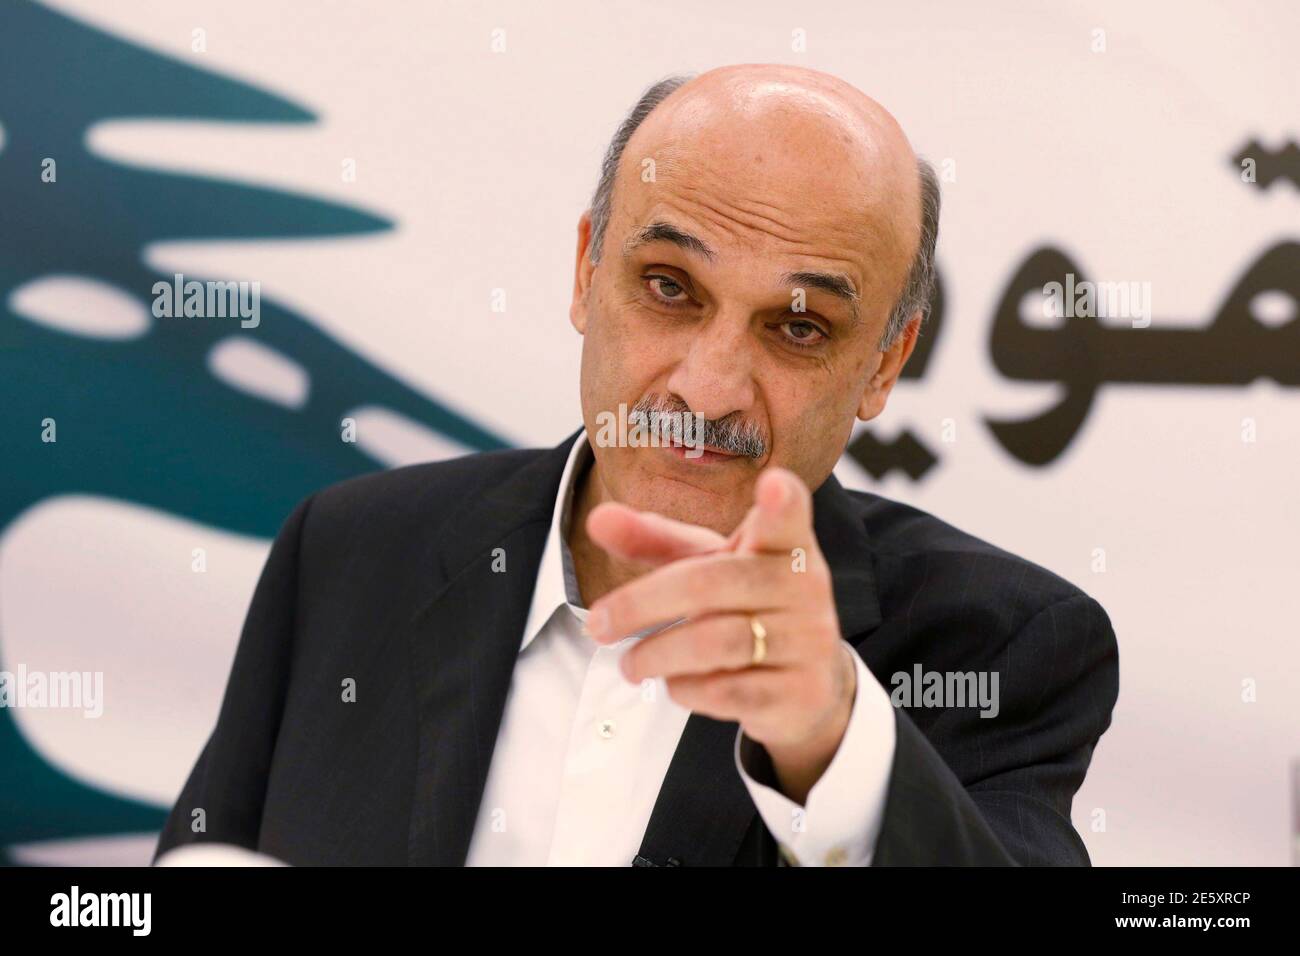 Geagea, leader the Christian Lebanese Forces, speaks during an interview with at his home in the Christian village of Maarab in the mountains overlooking the seaside of Jounieh,